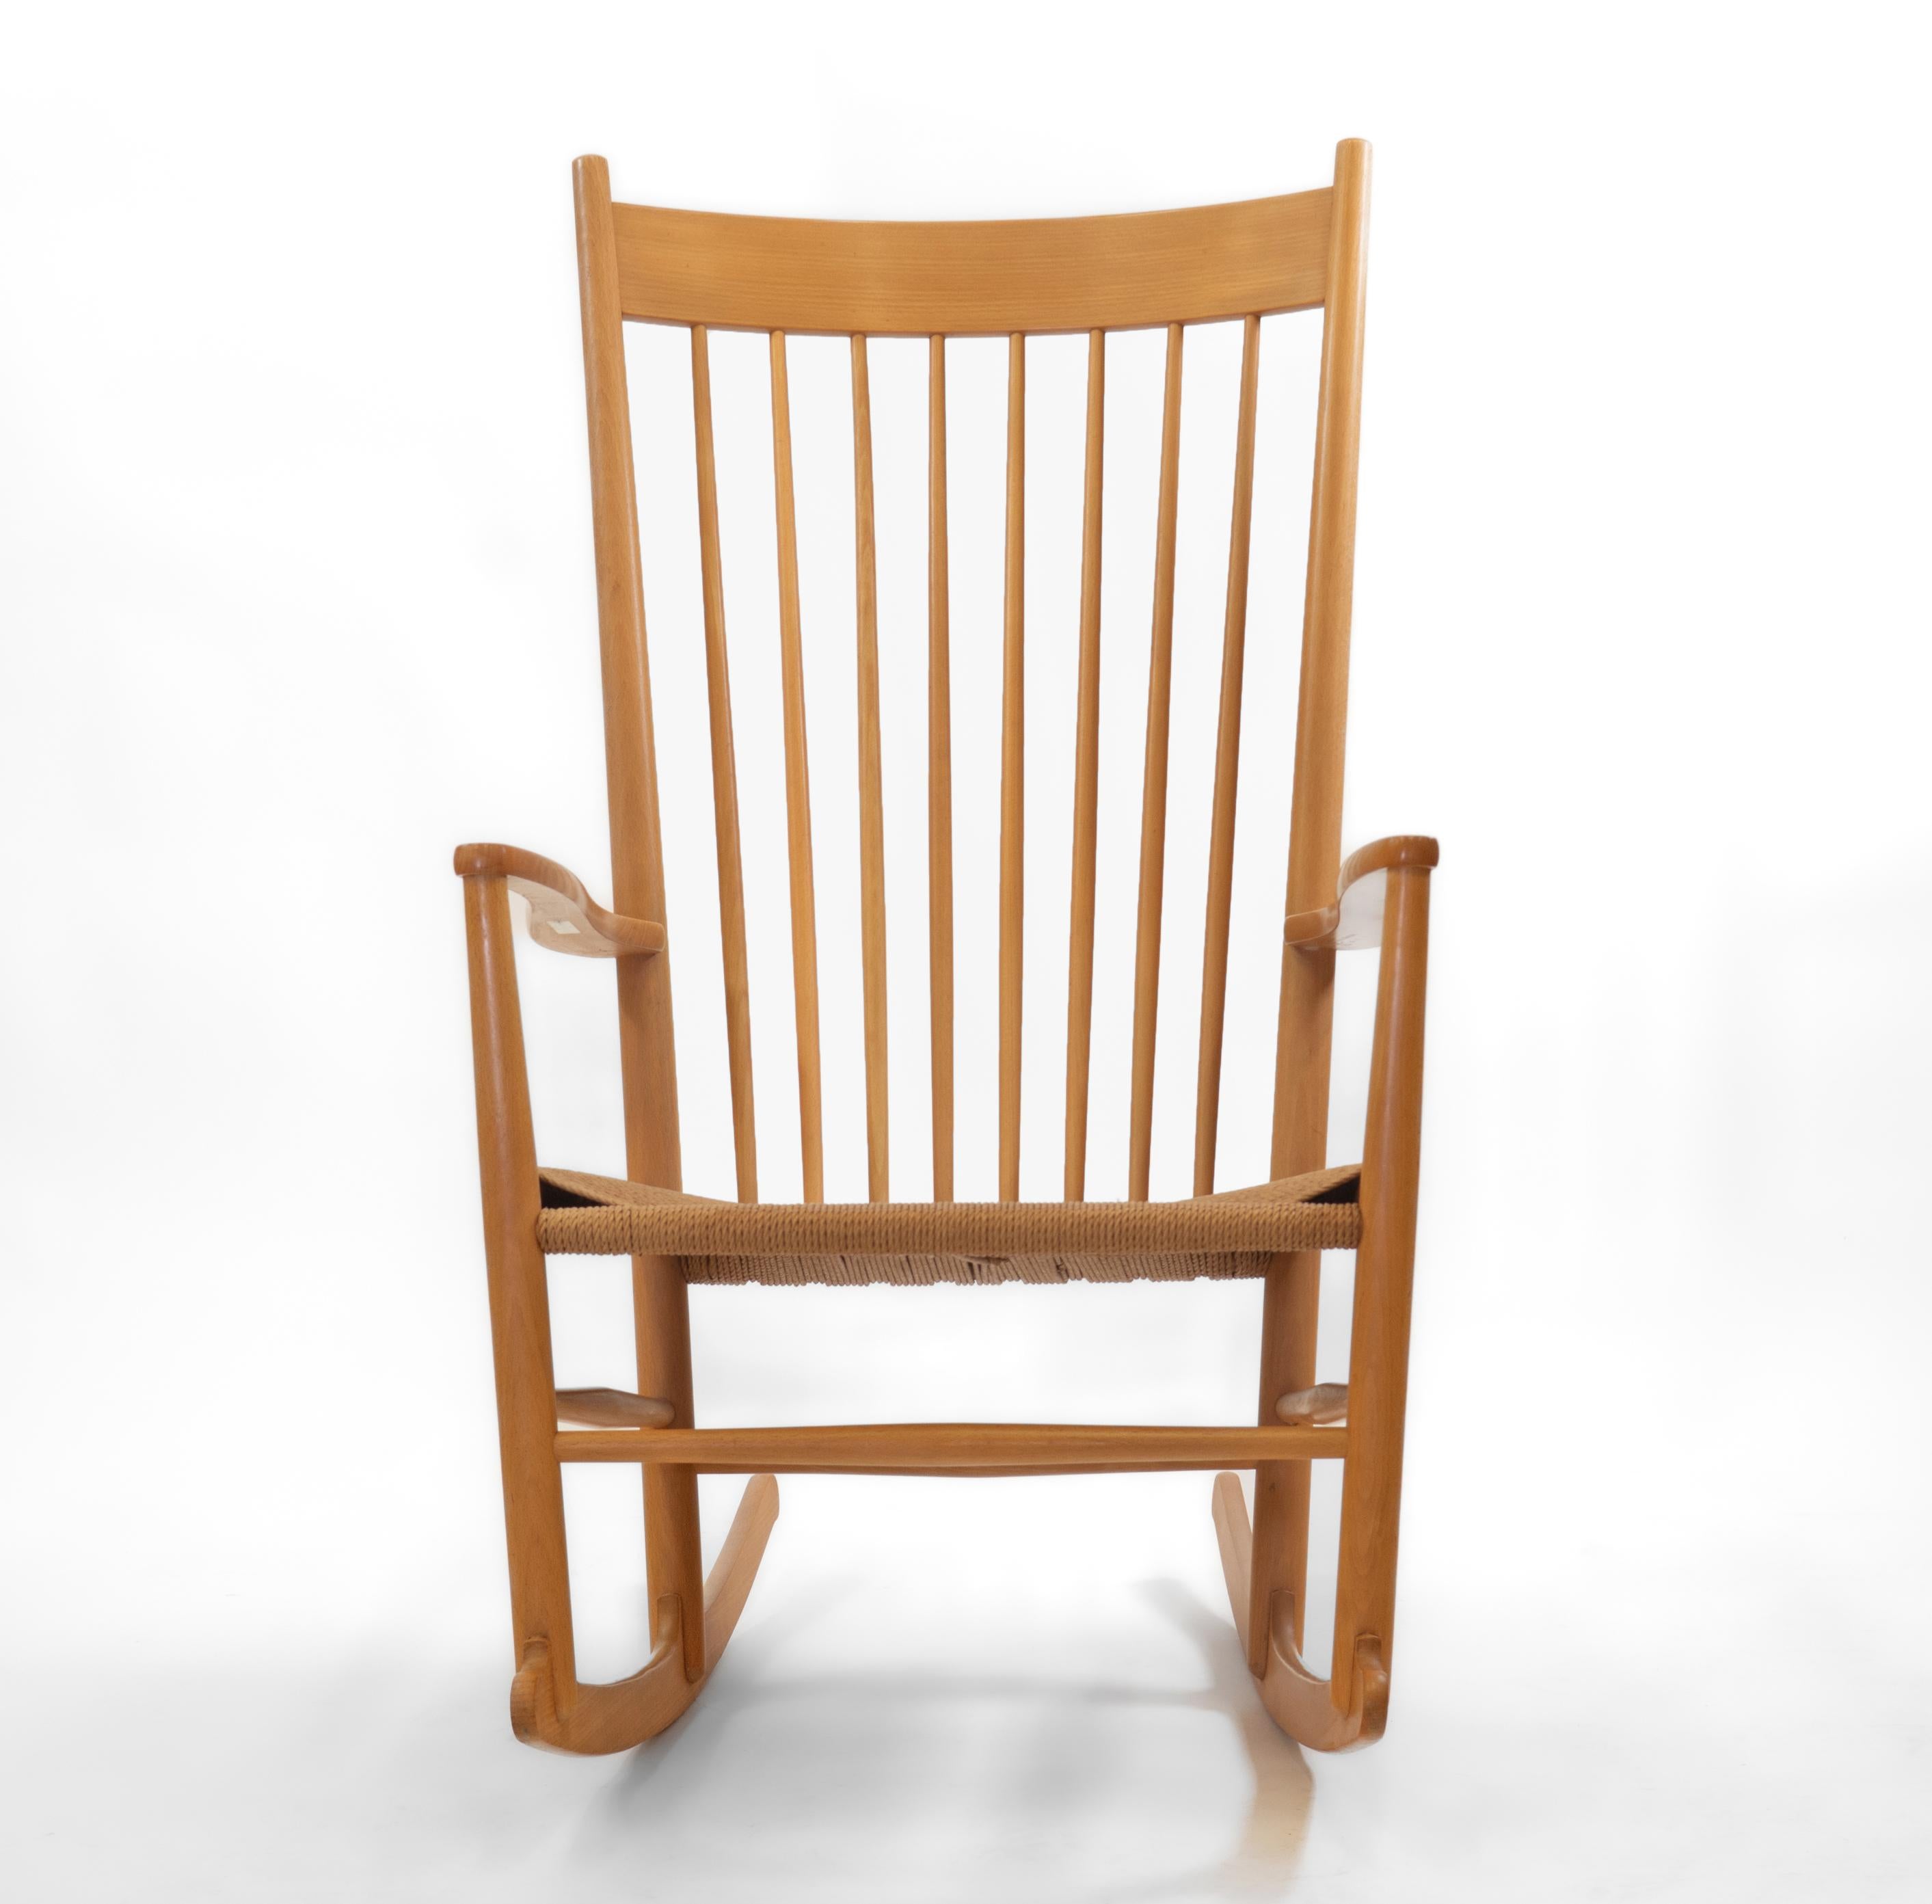 A Danish design classic - J16 beechwood rocking chair by Hans Wegner. 

Introduced in 1944, this model dates to the 1960's, stamped 'Made in Denmark 66.5.1' along with the maker's label for FDB.

The rocking chair is an excellent clean example,